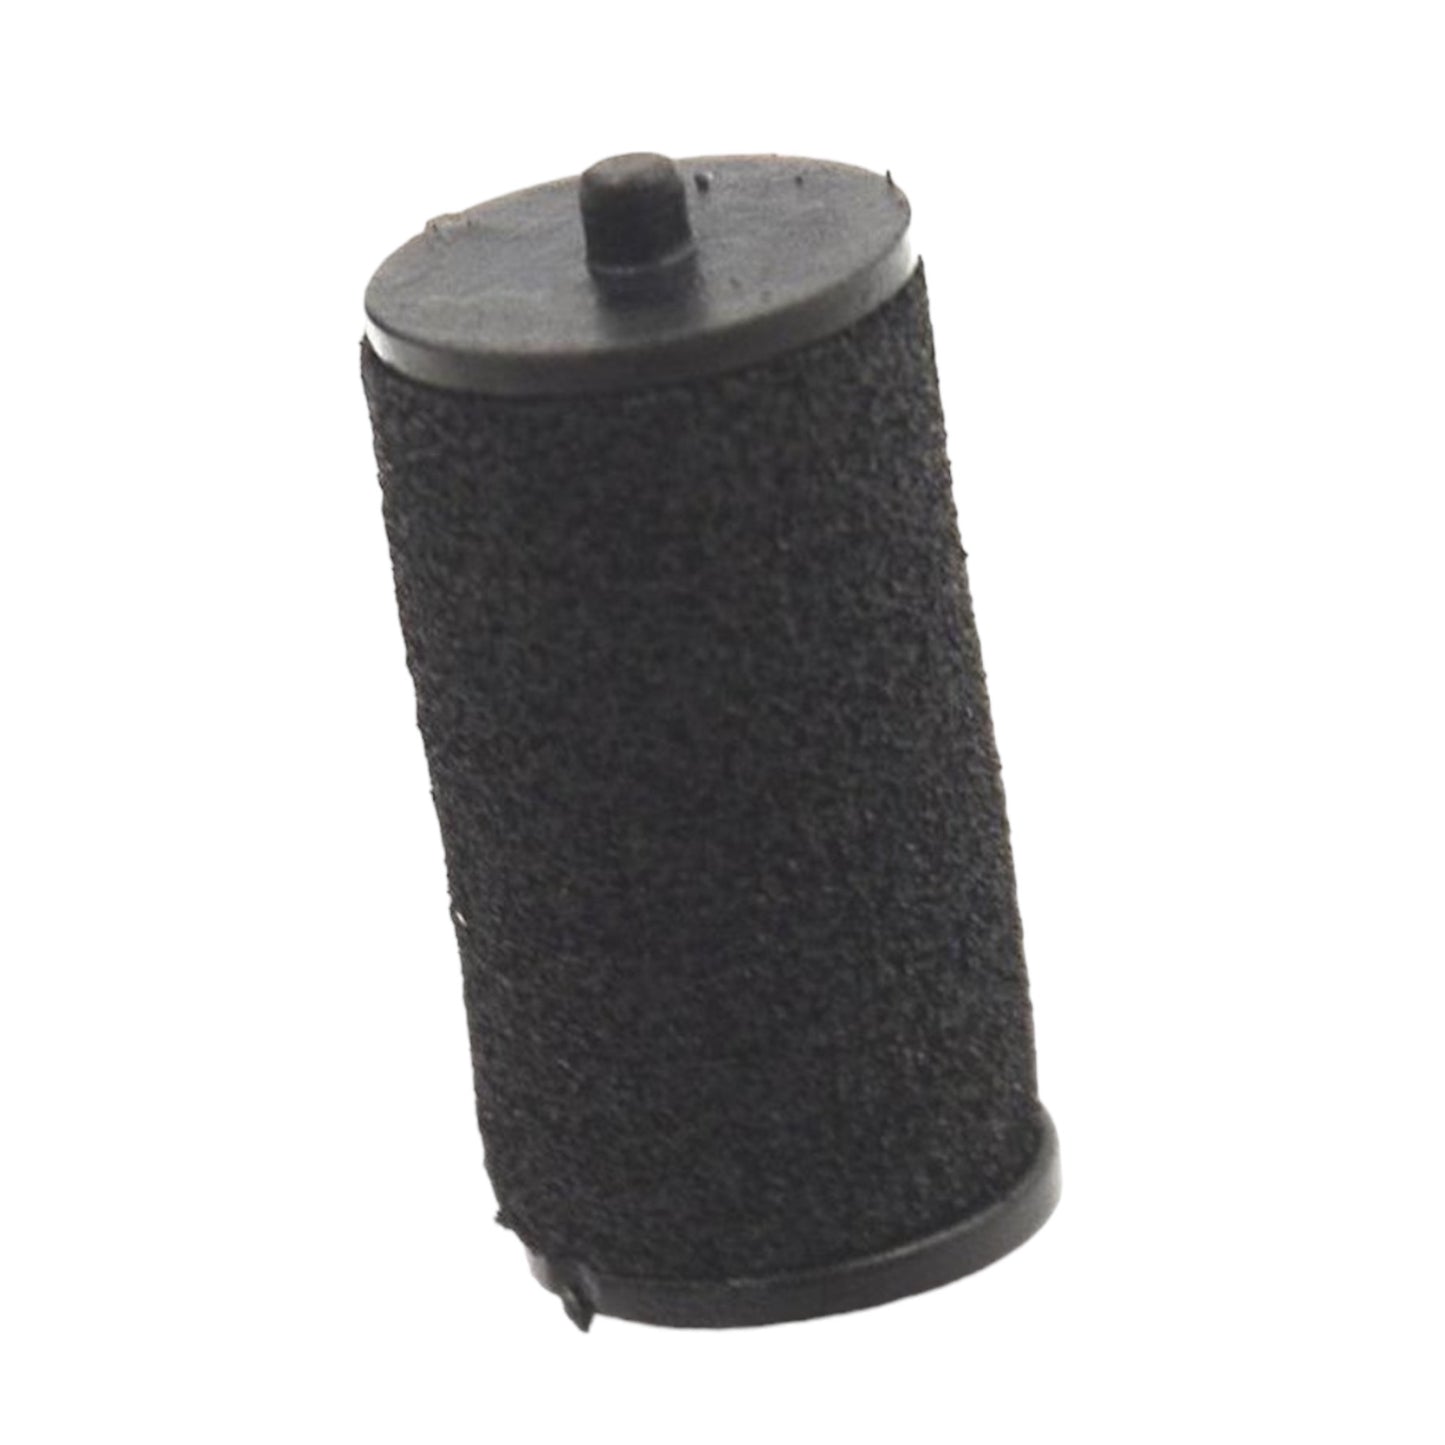 Refillable Ink Roll for MX-5500 V-5500 Price Labeller 1 Piece 20mm